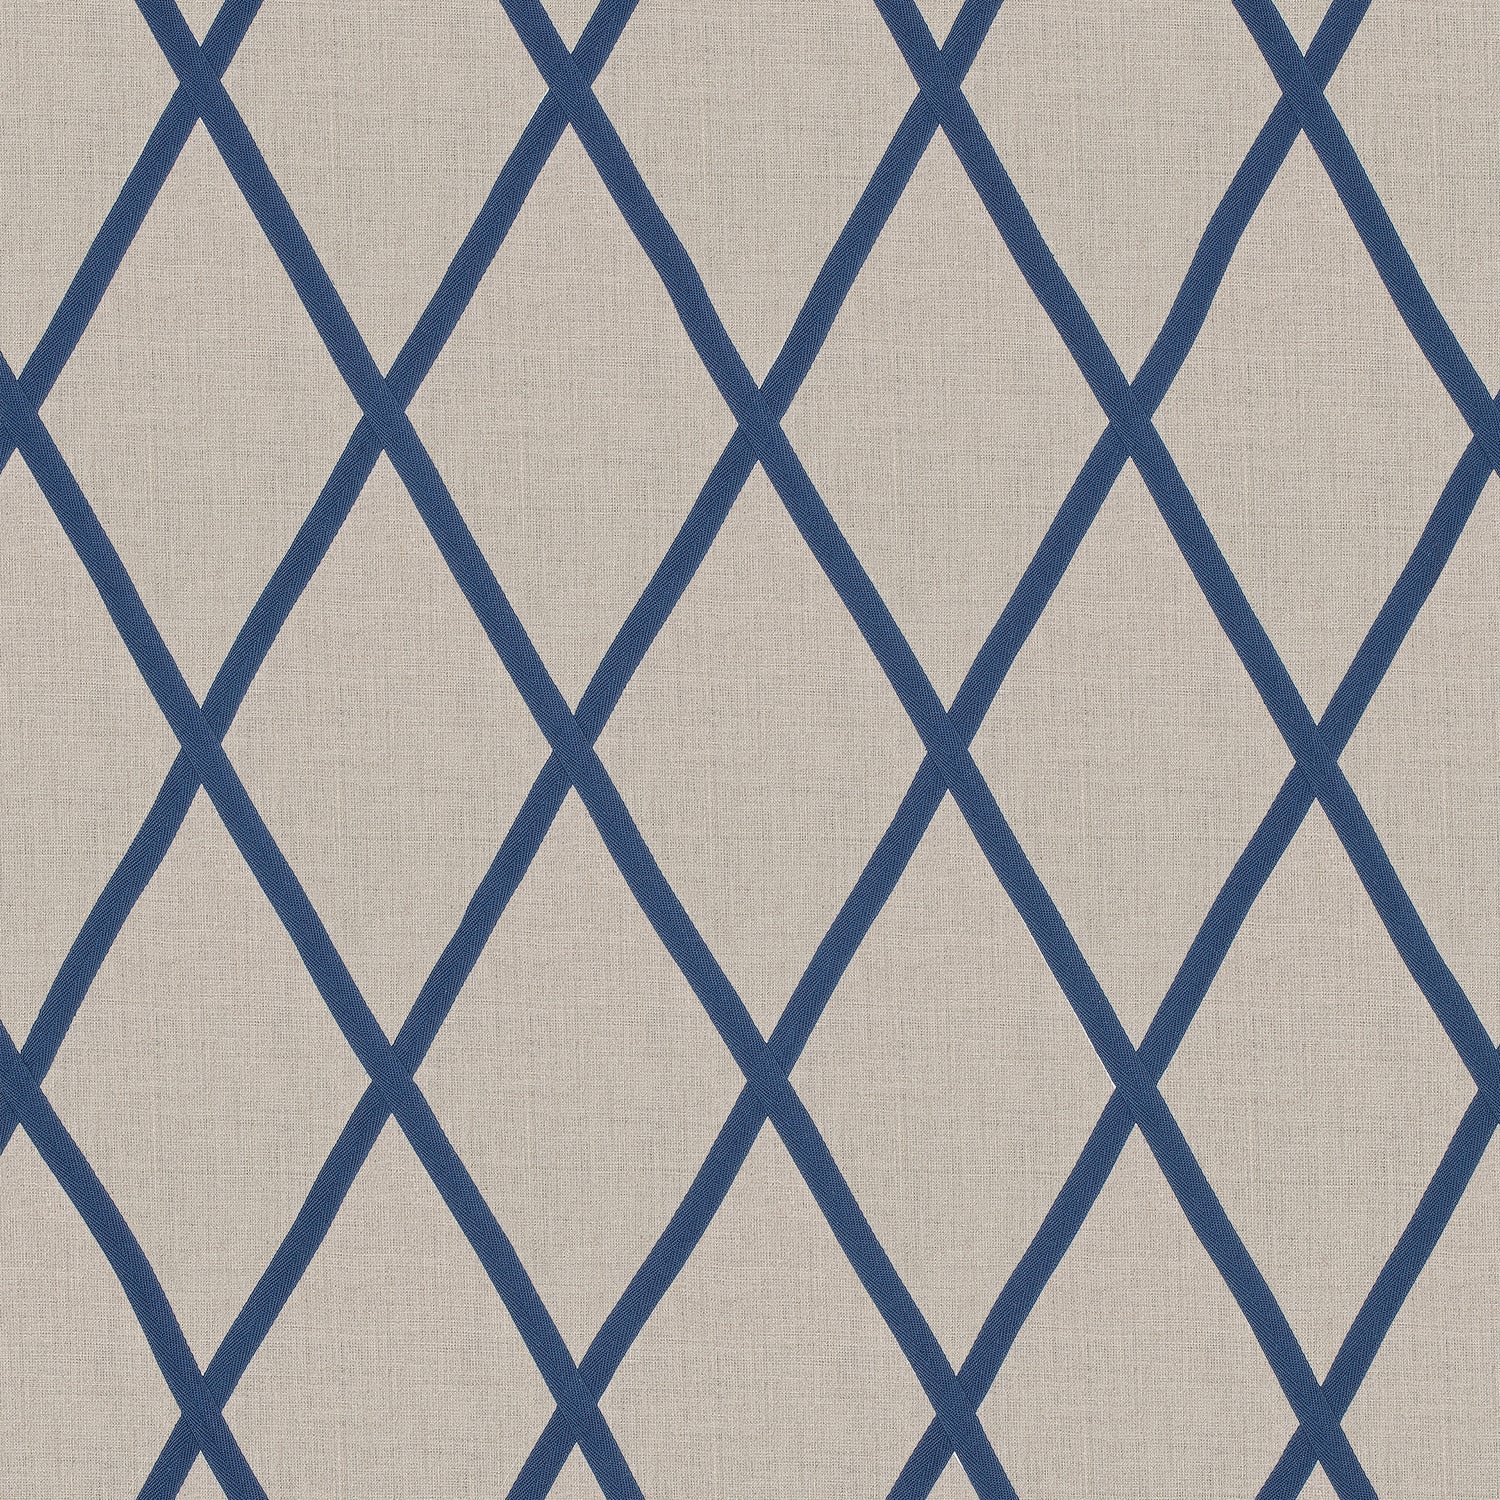 Tarascon Trellis Applique fabric in navy on natural color - pattern number AW78713 - by Anna French in the Palampore collection